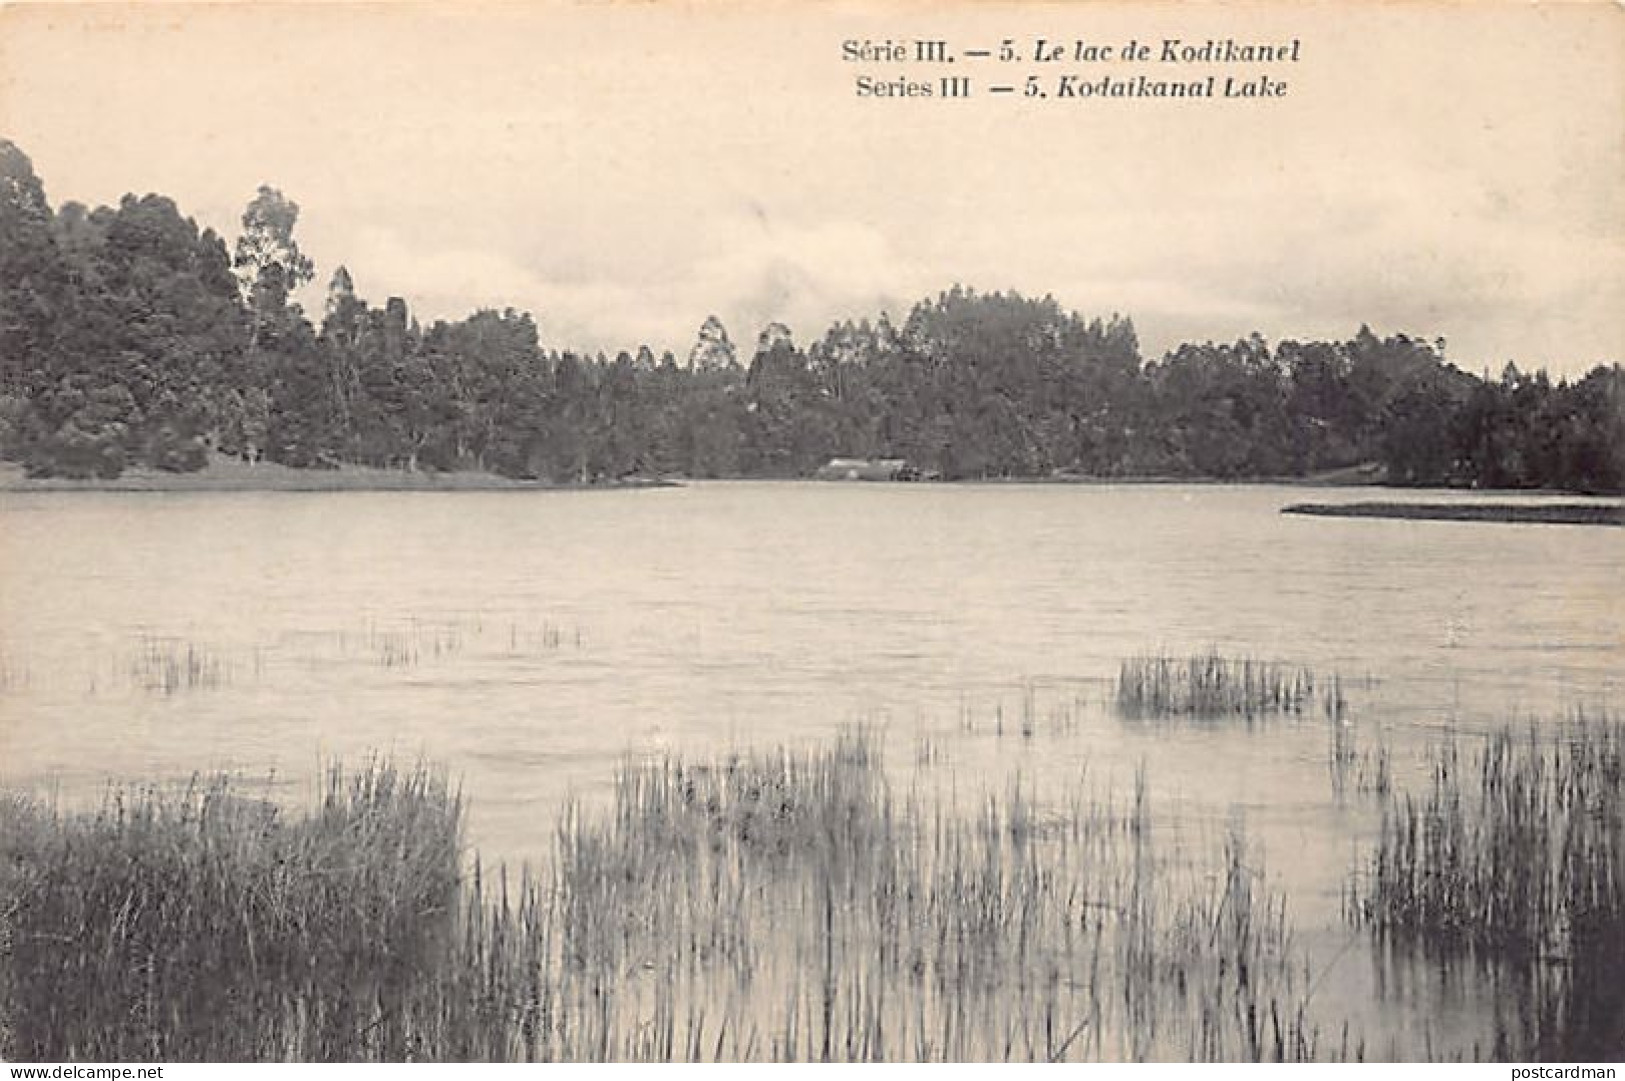 India - KODAIKANAL Tamil Nadu - The Lake - Publ. Works From Industrial Schools Of South India - Inde